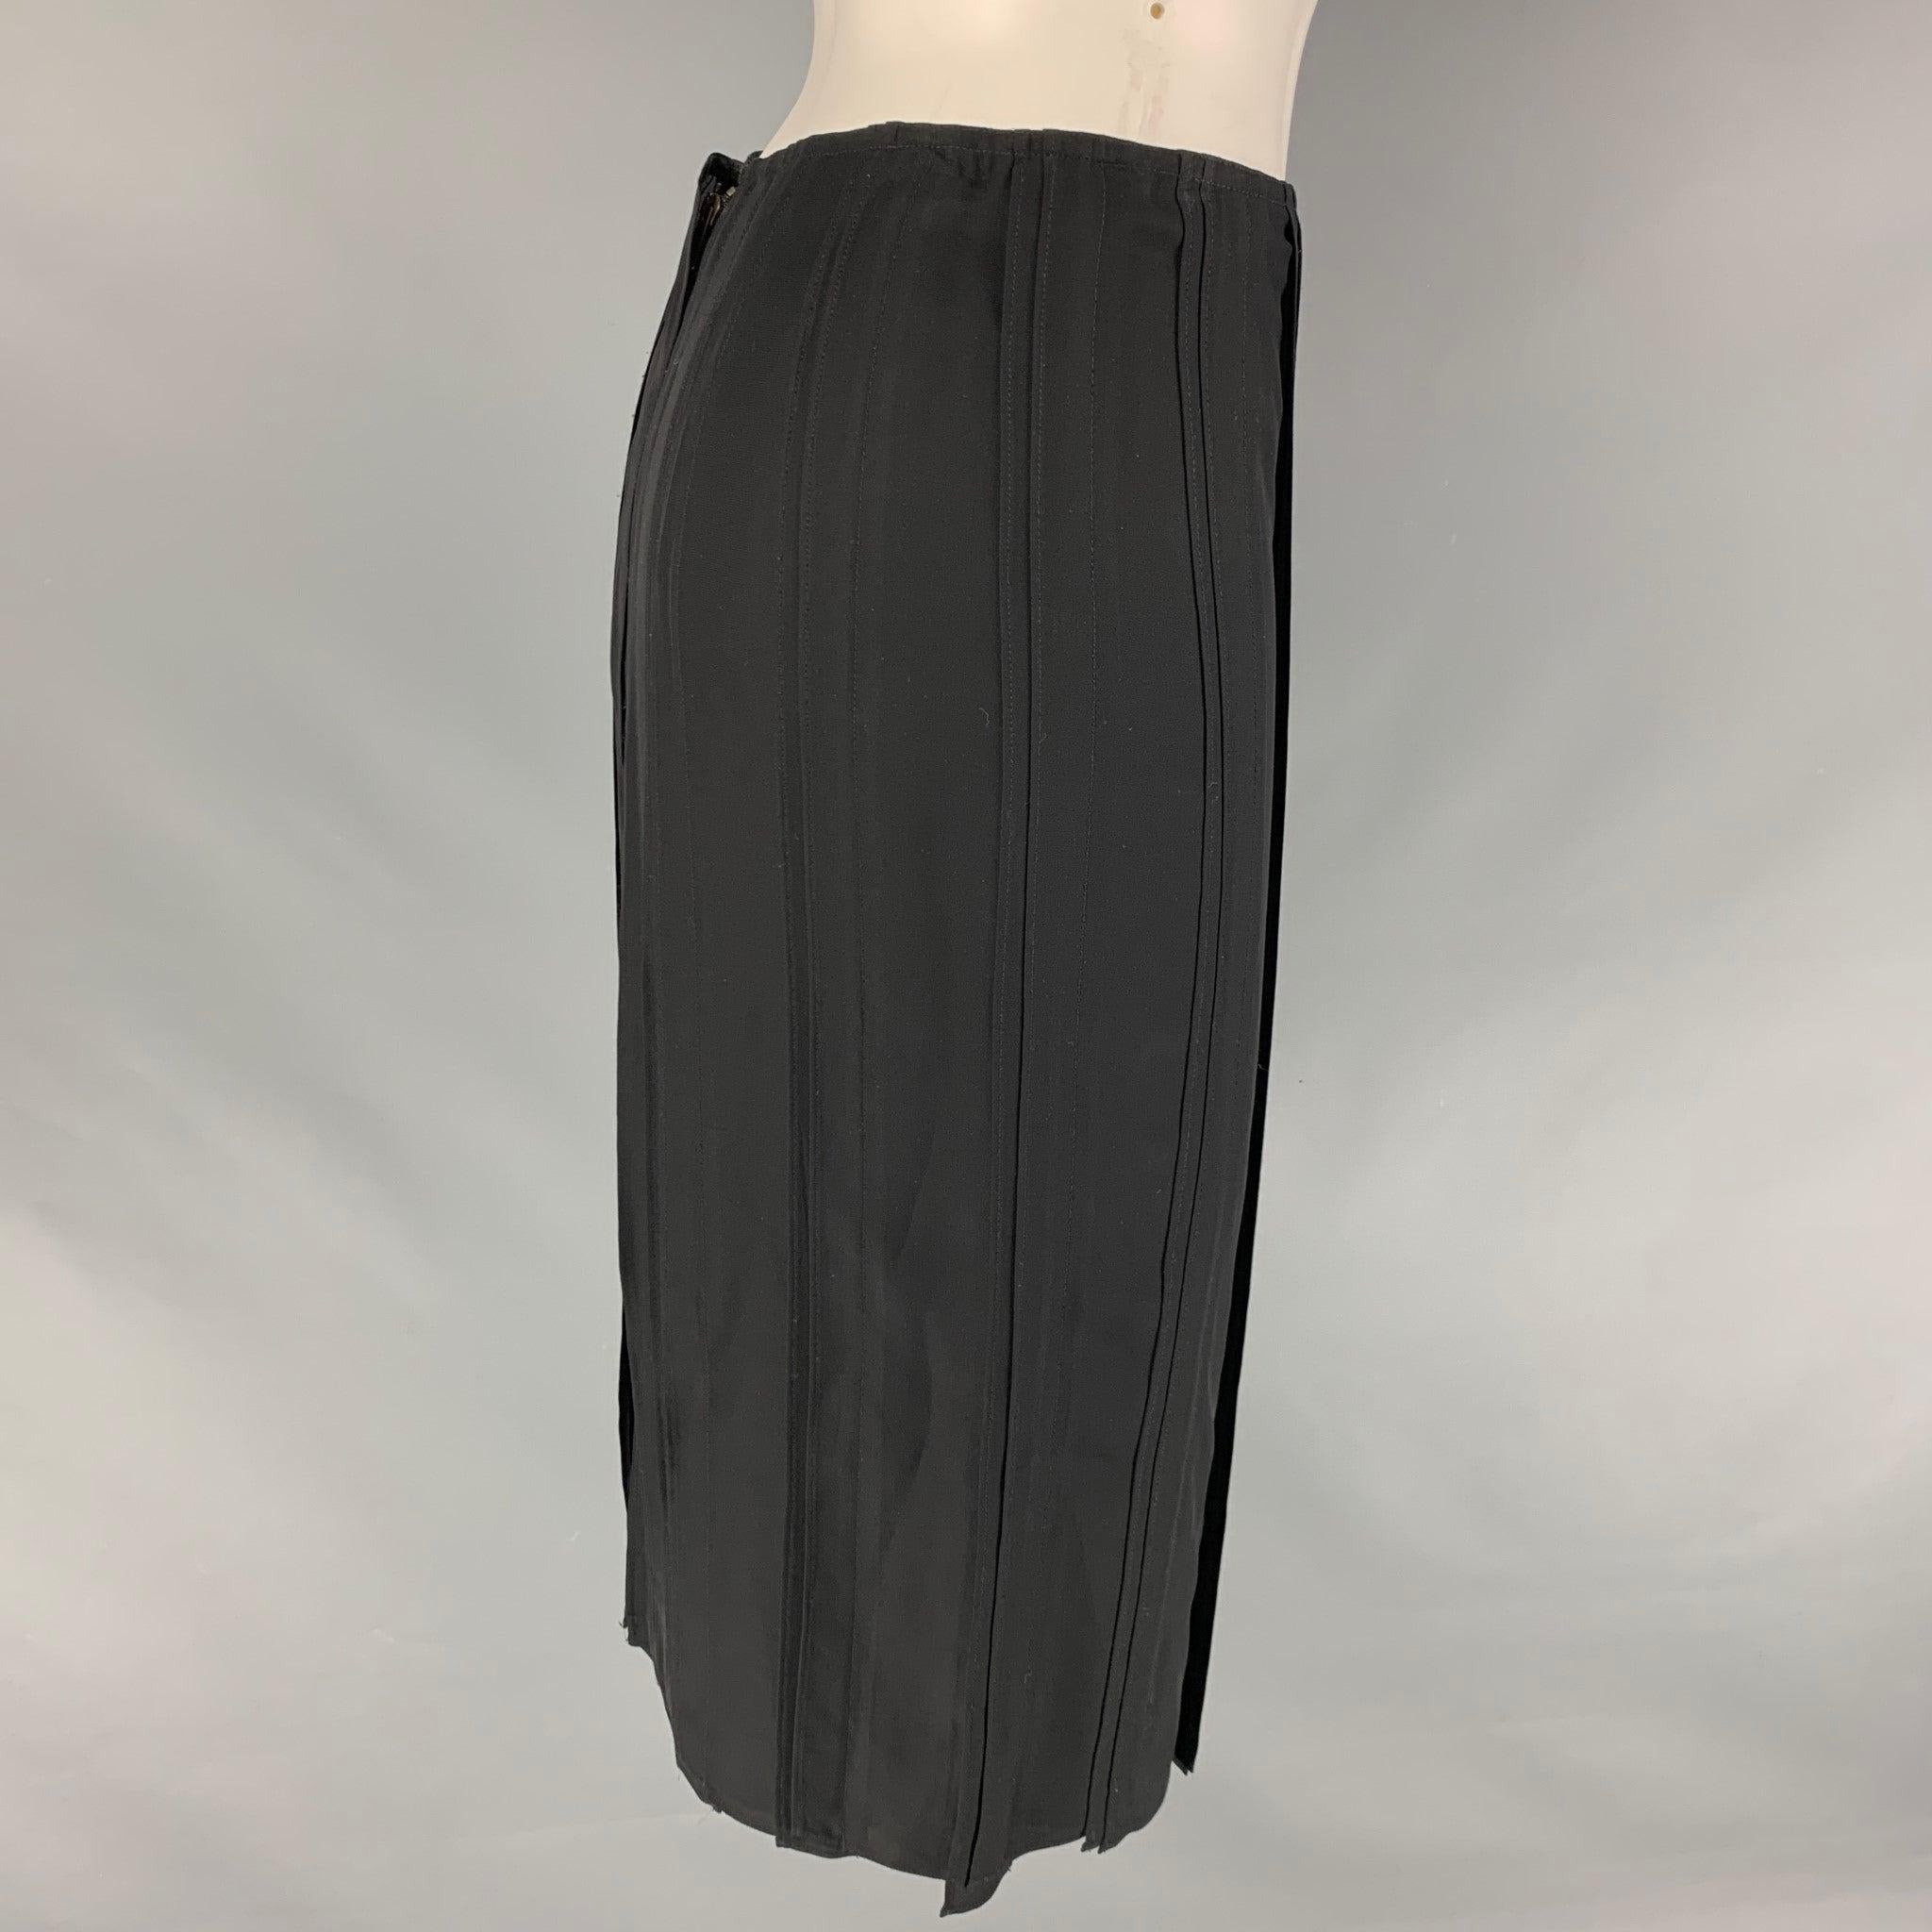 YVES SAINT LAURENT pencil skirt comes in a black silk material featuring a pleated style, and a center back zip up closure. Made in France.Excellent Pre-Owned Condition.  

Marked:   36 

Measurements: 
  Waist: 27 inches Hip: 34 inches Length: 25